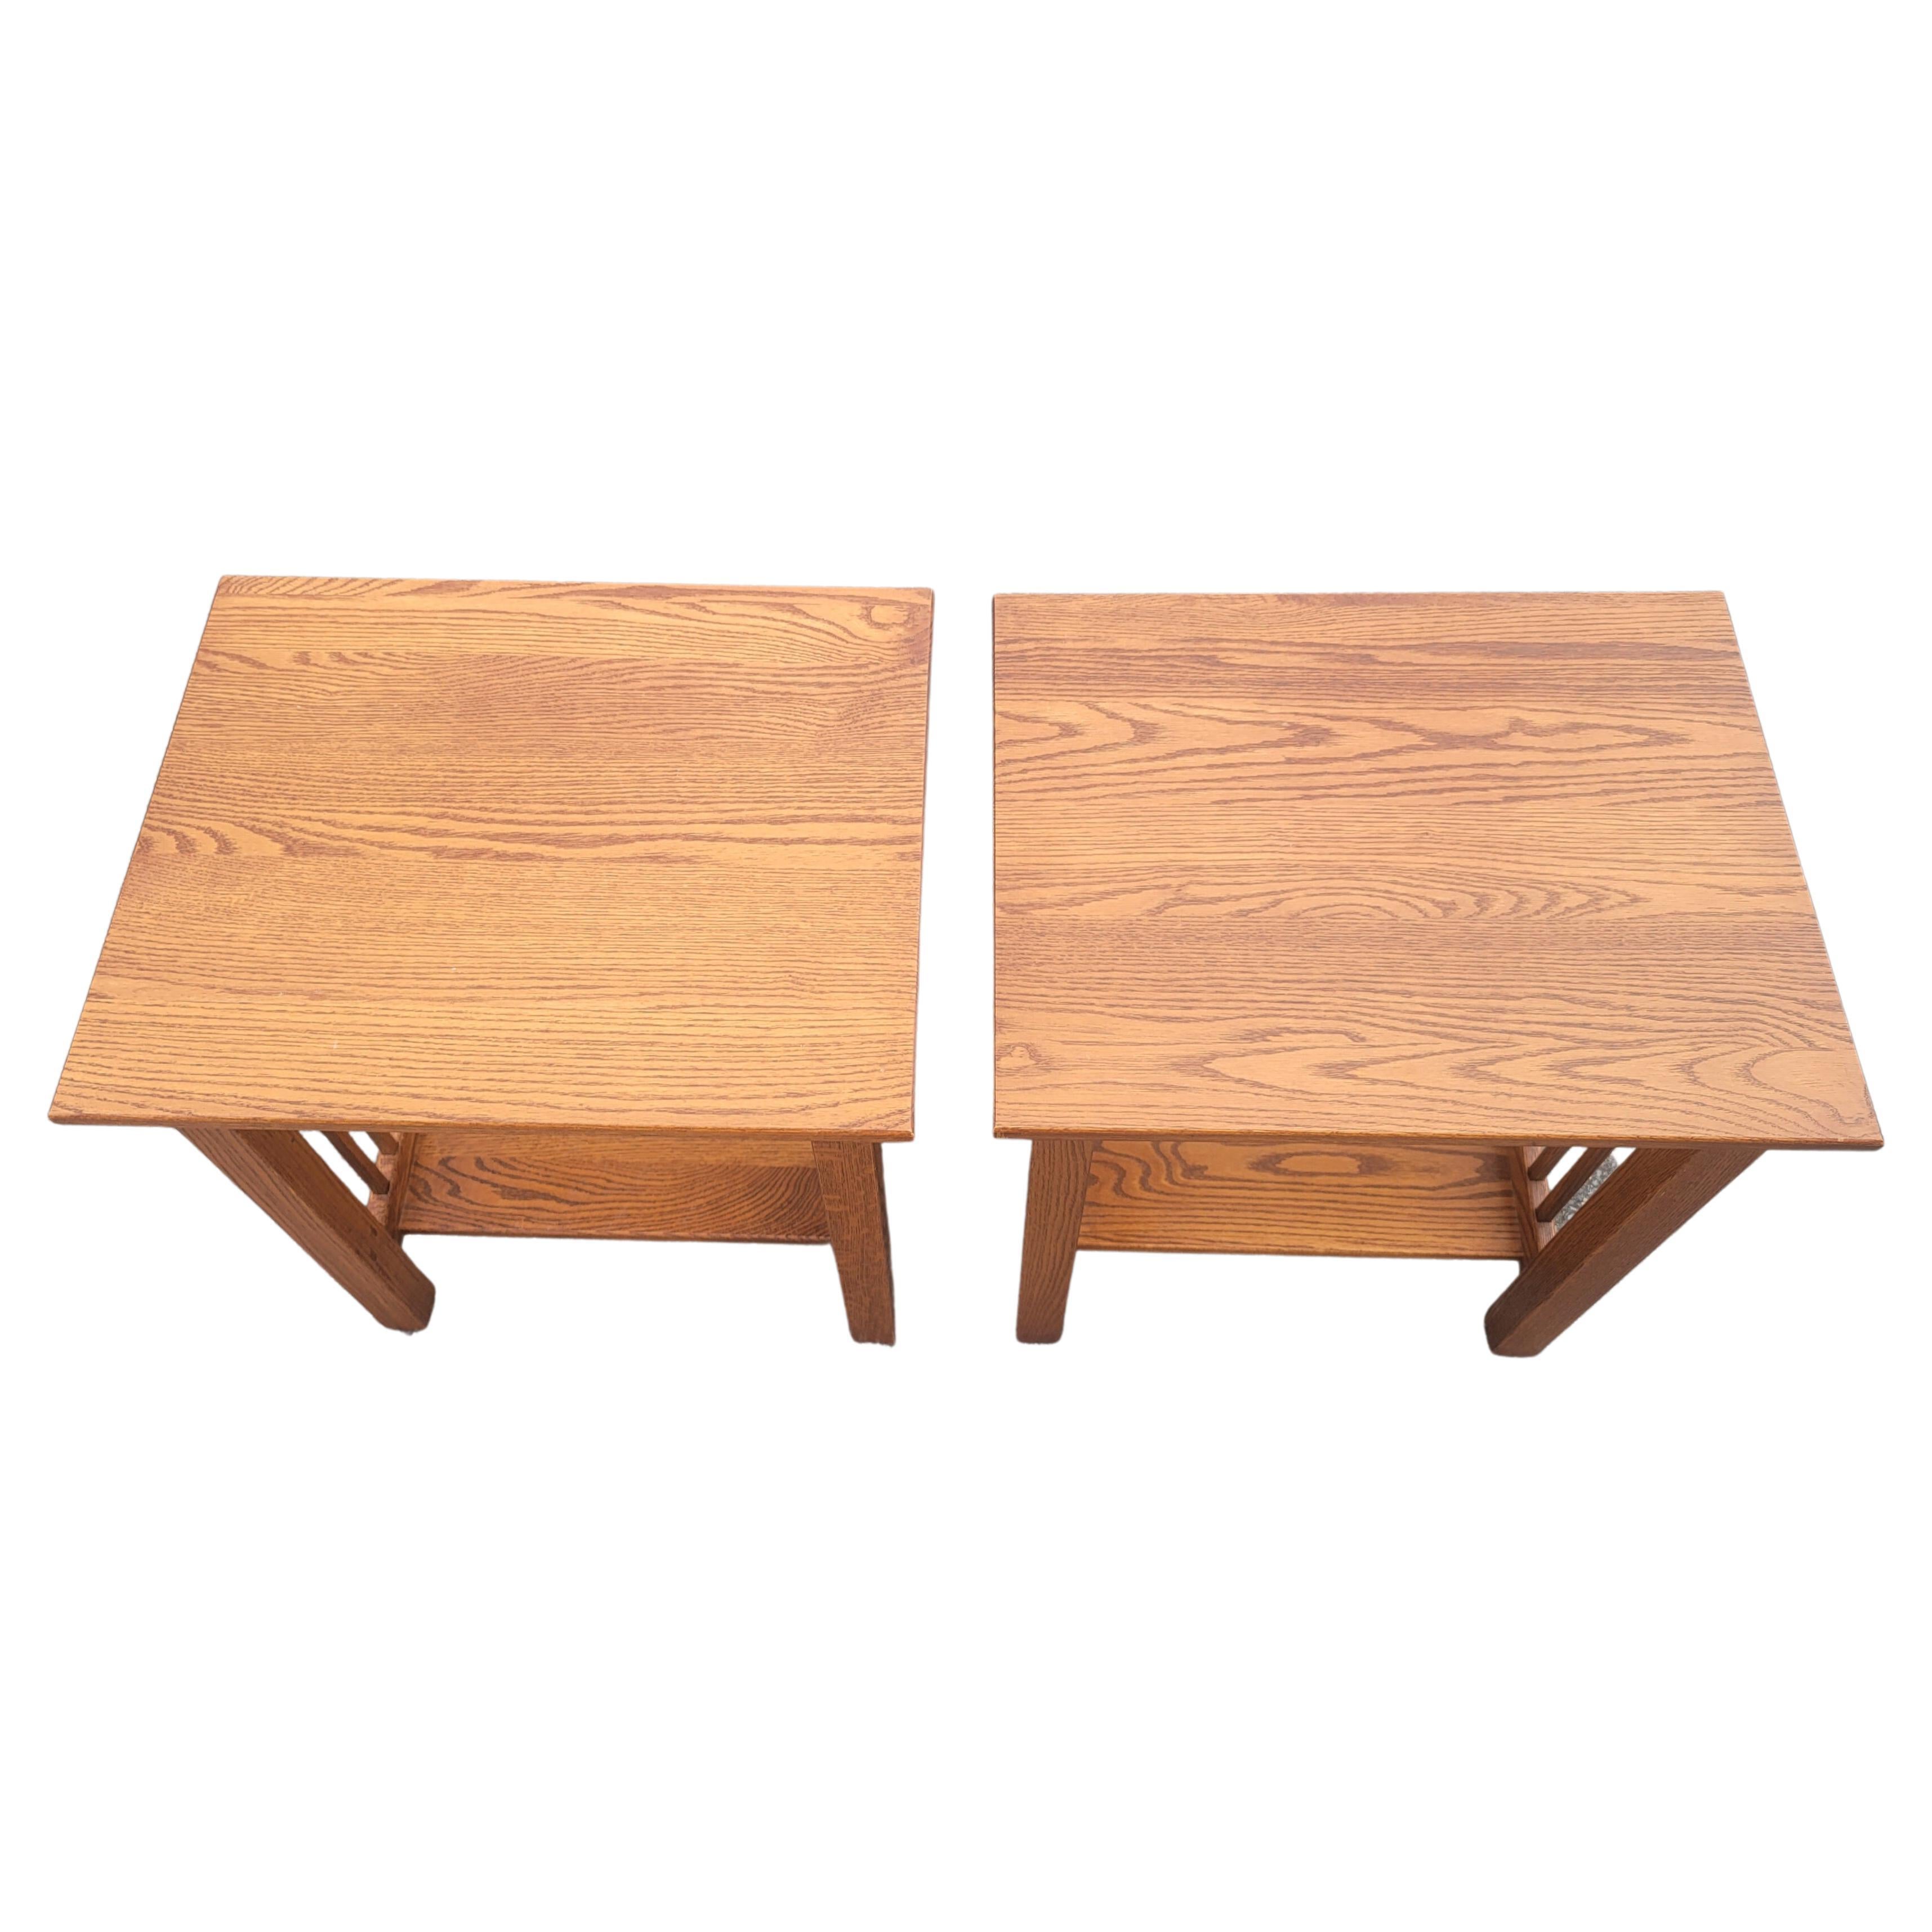 Country View Amish Arts & Crafts Mission Oak Side Tables, a Pair For Sale 1